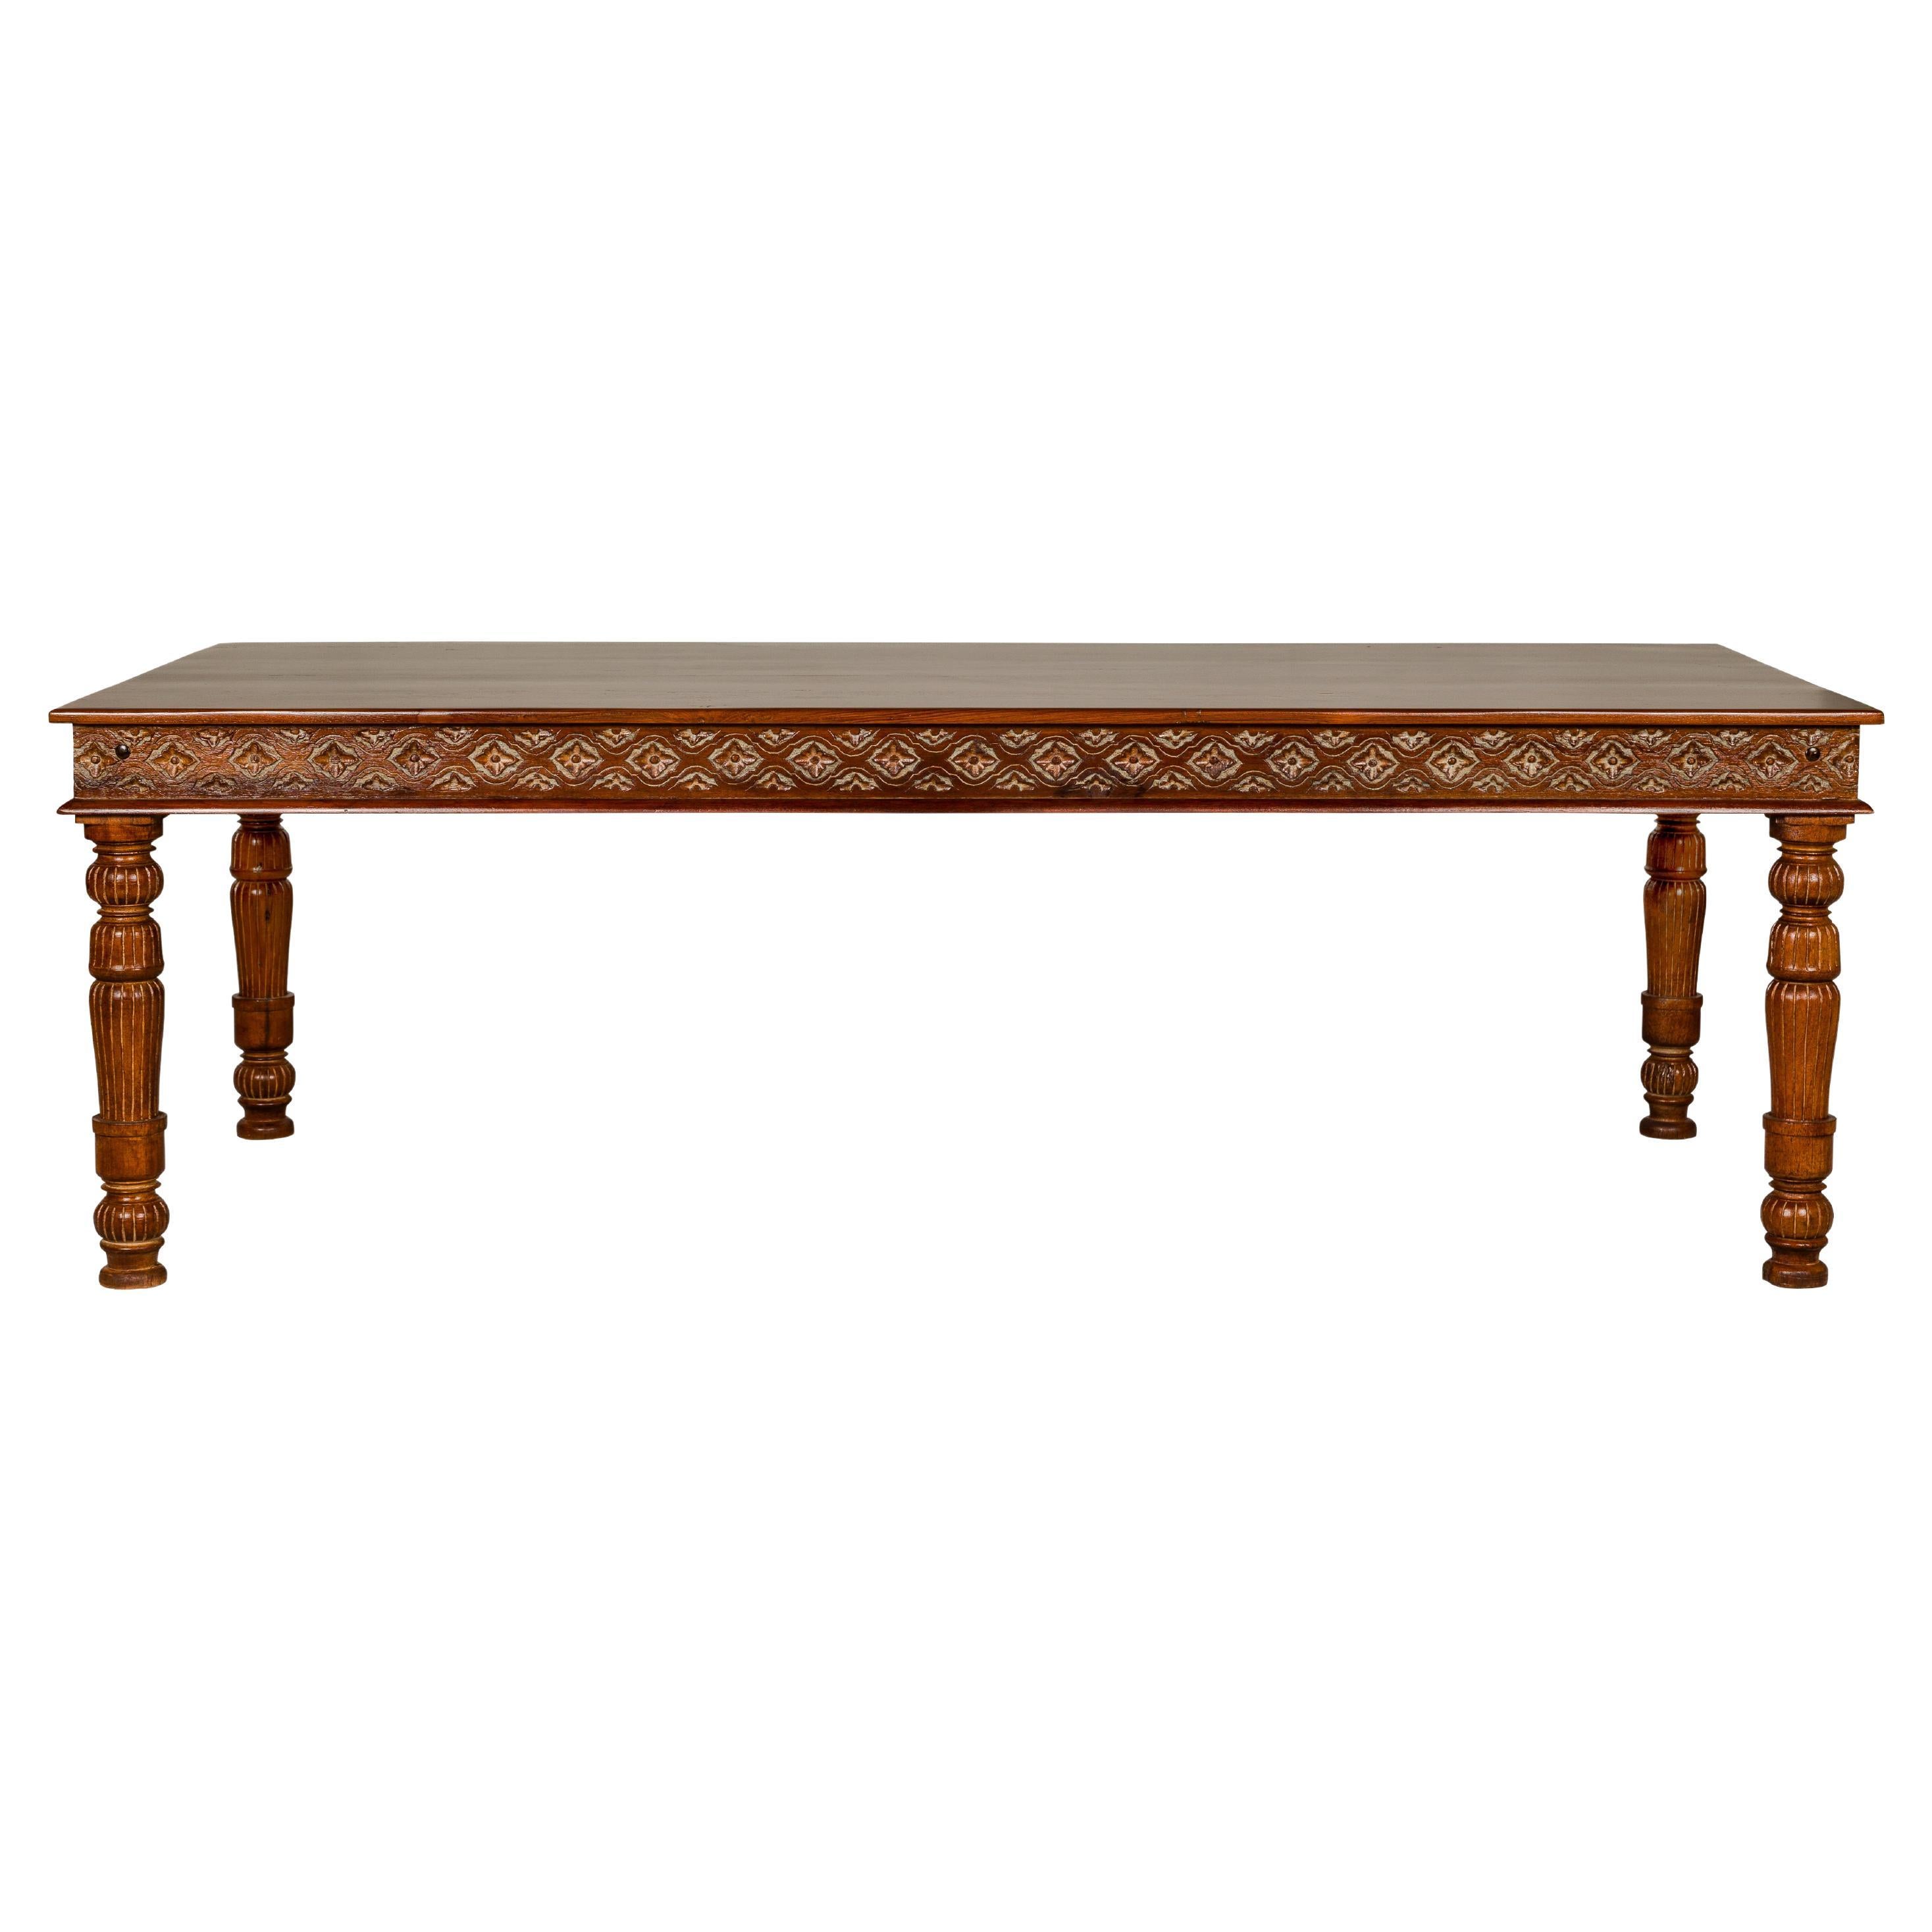 Large Dining Room Table with Carved Apron, Floral Motifs and Turned Legs For Sale